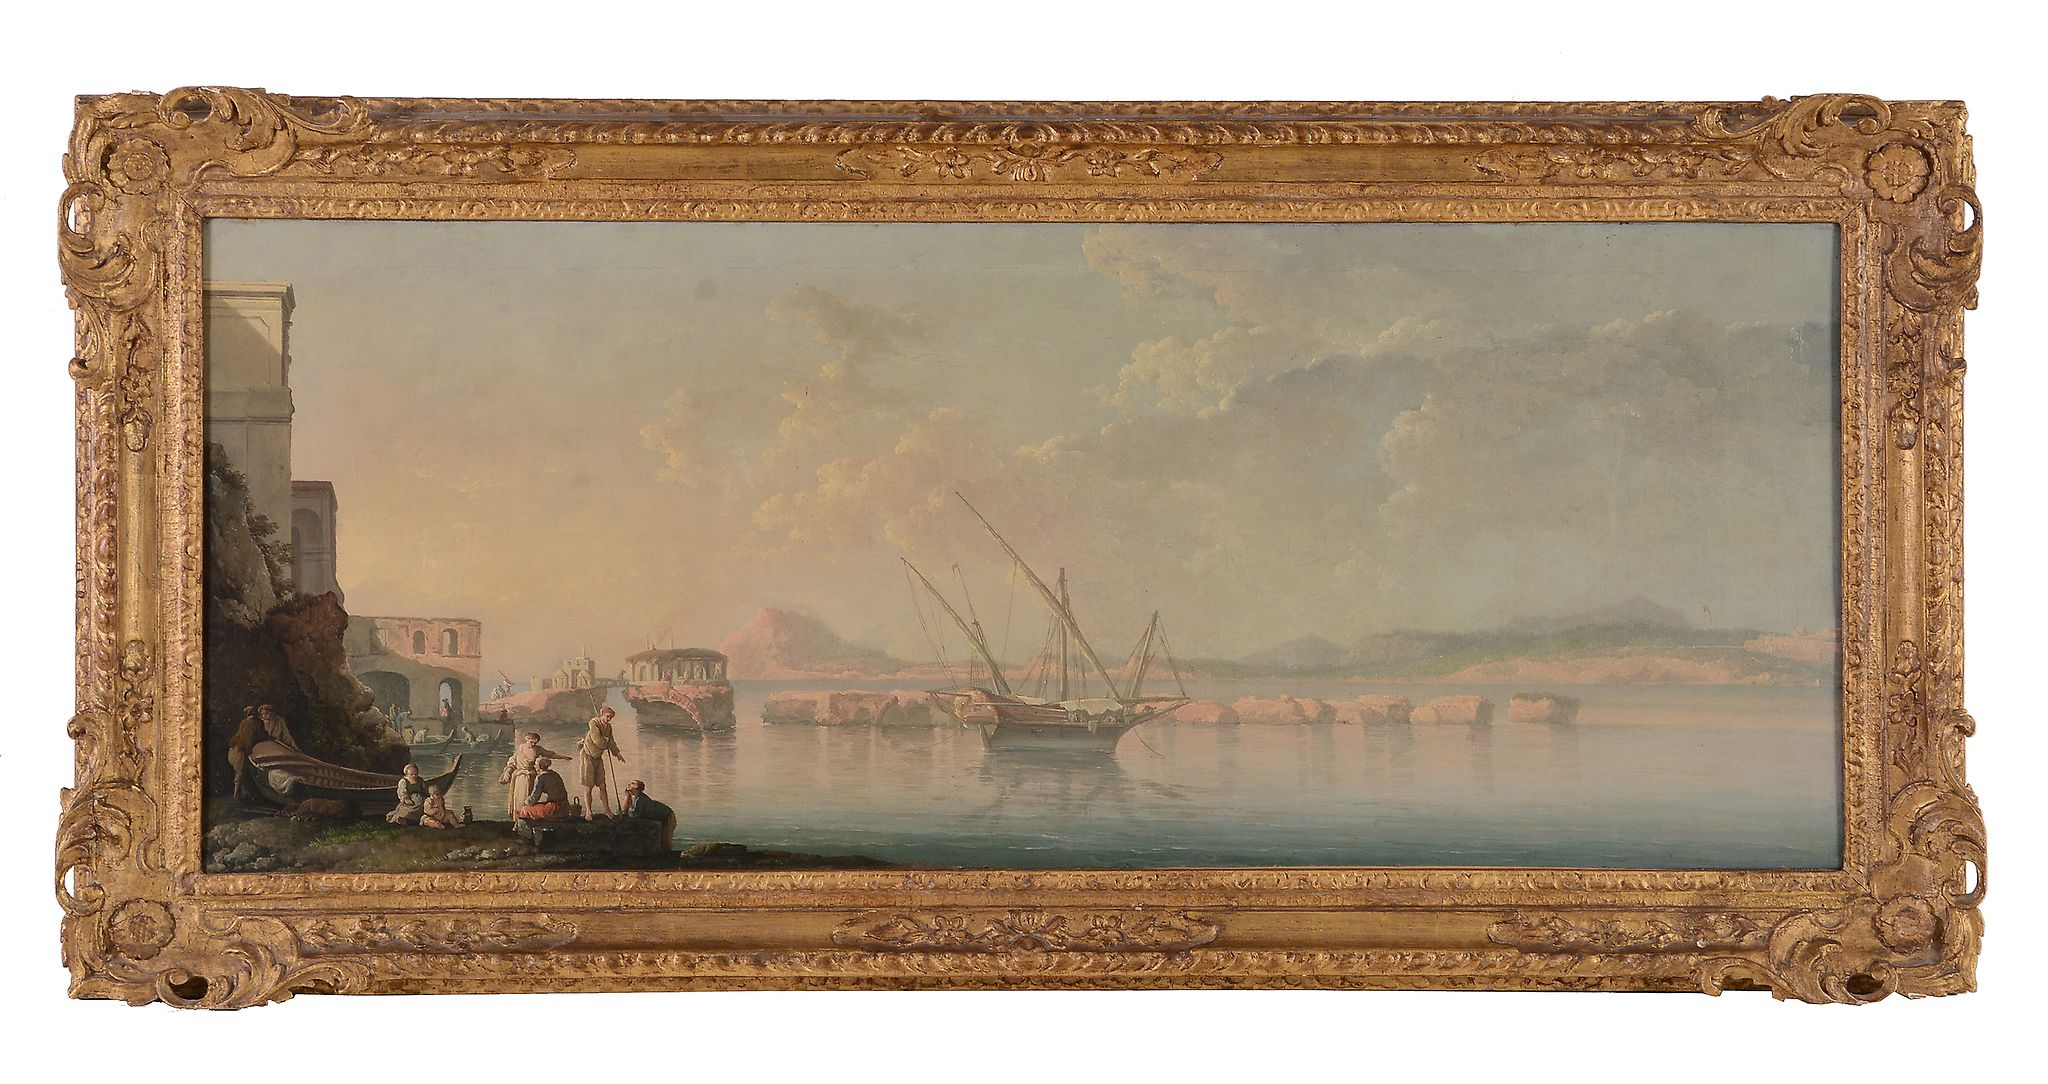 Carlo Bonavia (fl. 1740-1756) - View from Miseno, looking across the Mare Morto Oil on canvas - Image 2 of 3